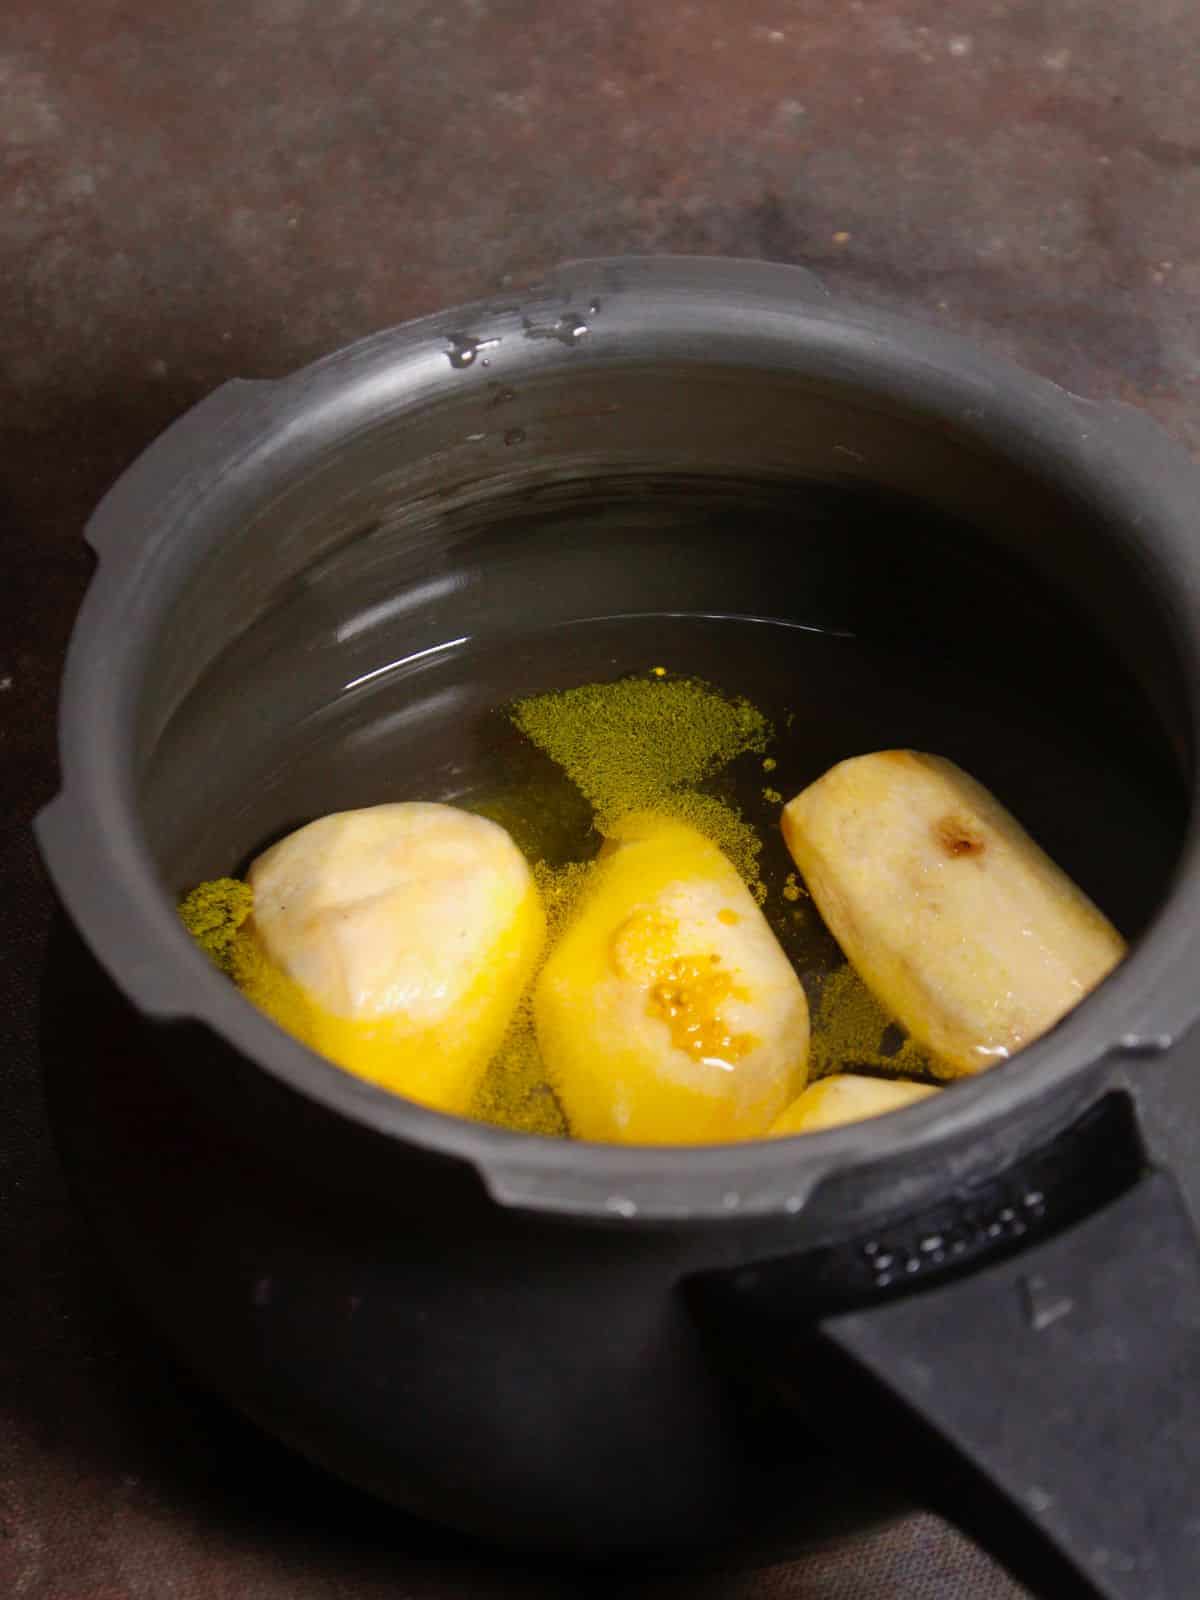 add yams along with turmeric into the pressure cooker and start boil